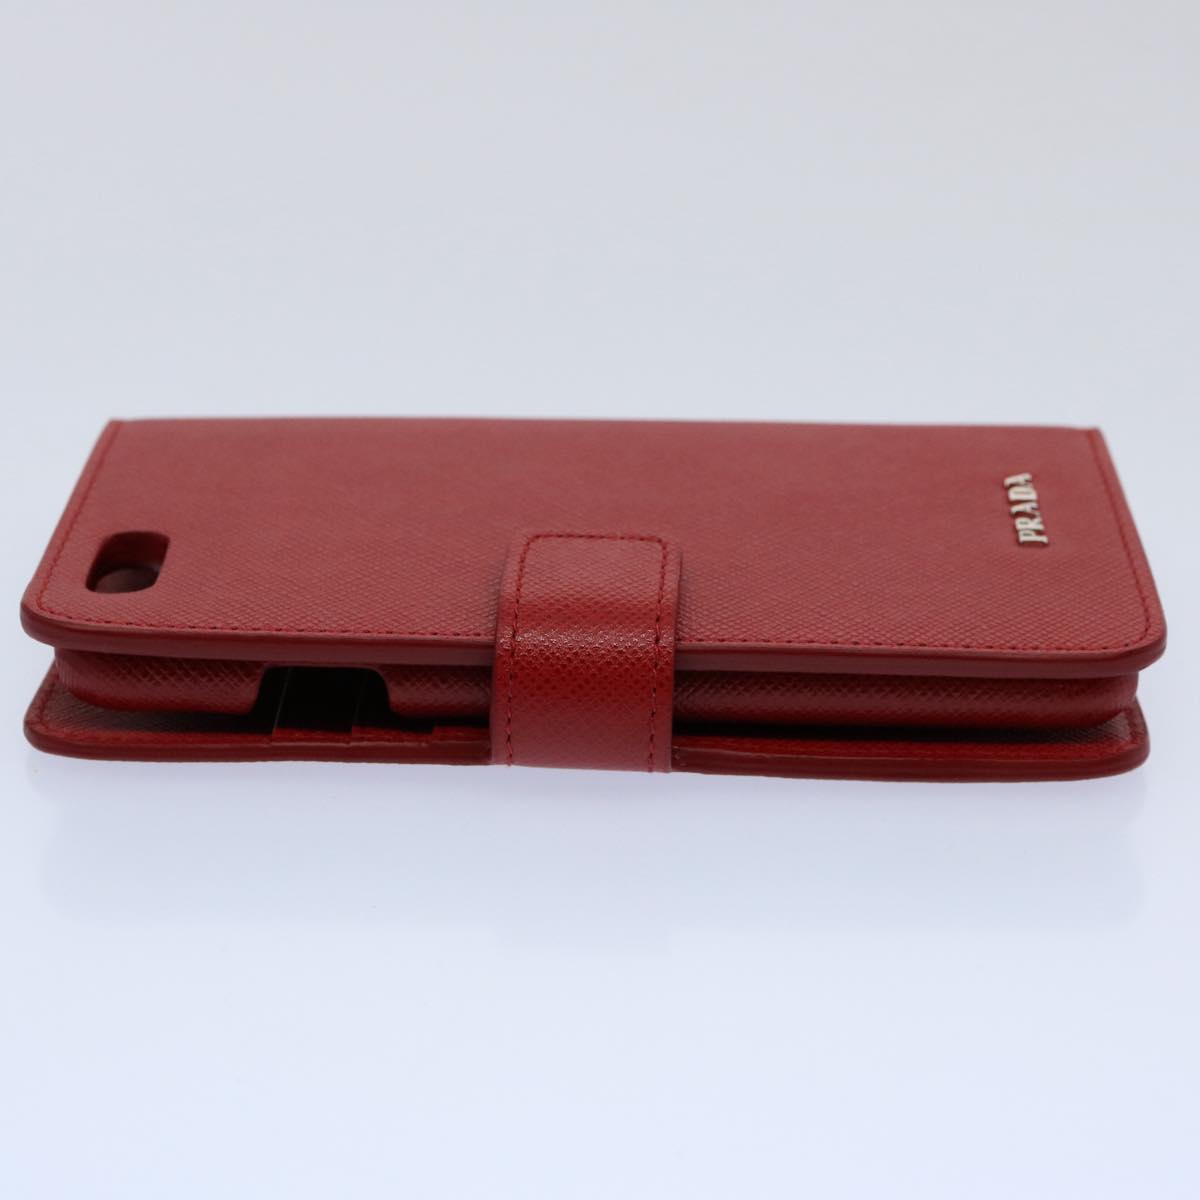 PRADA For iPhone 6 / 6S iPhone Case Safiano leather Red Auth am5276